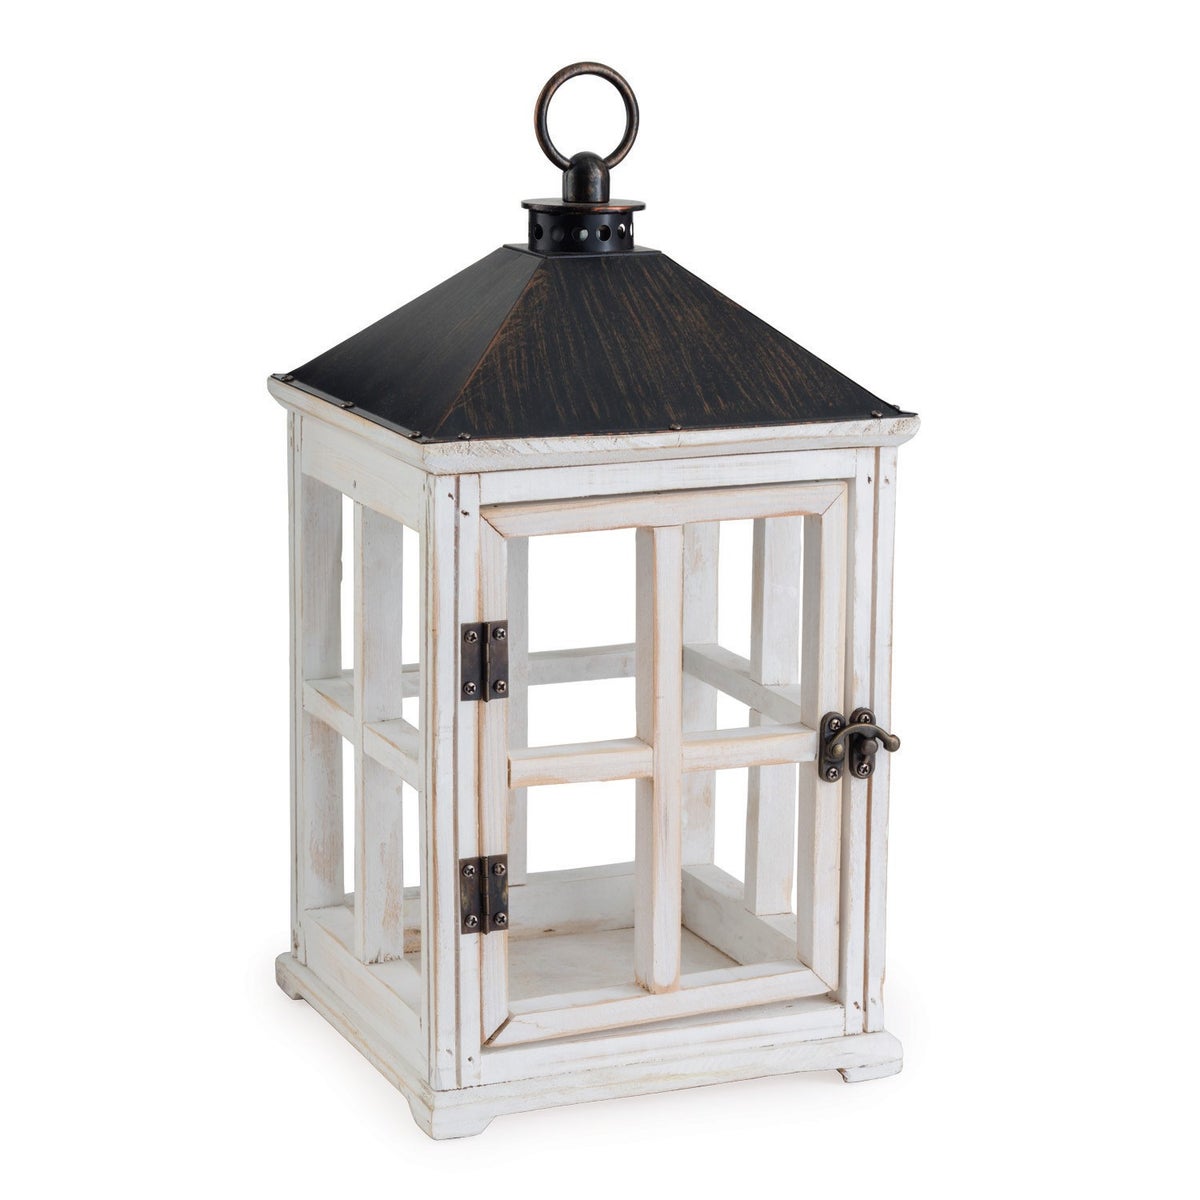 Wooden Lantern Candle Warmer - Weathered White